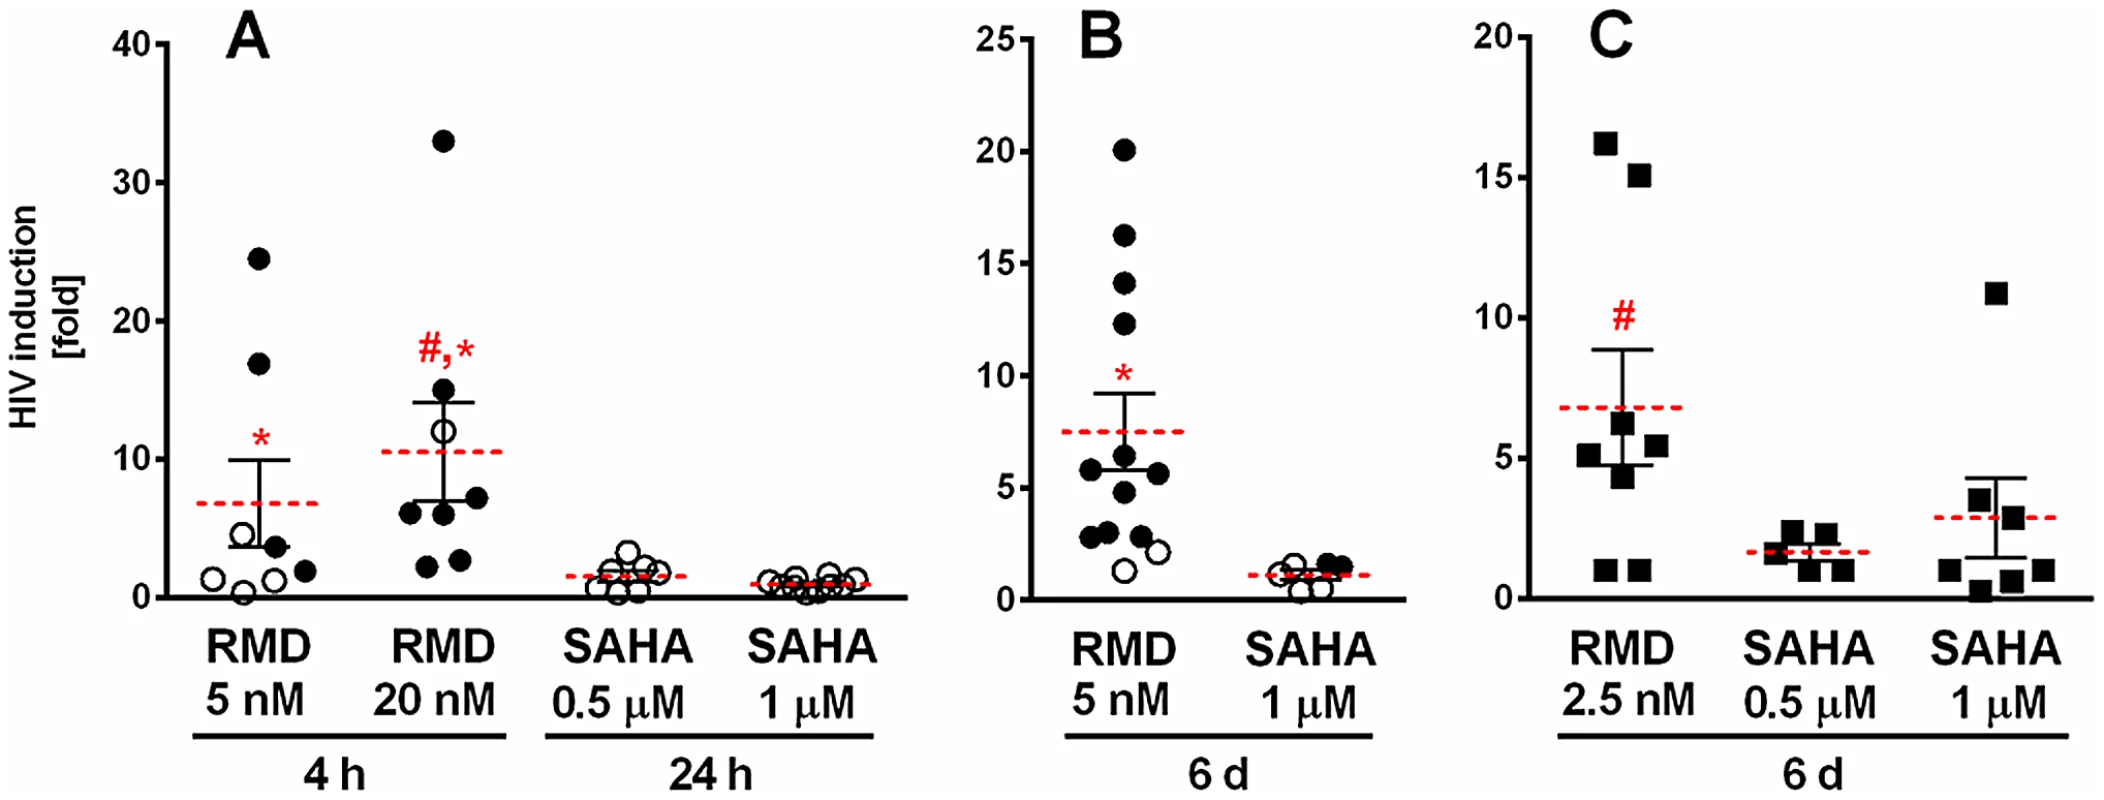 Induction of extracellular viral RNA release from CD4 T cells treated with RMD and VOR.